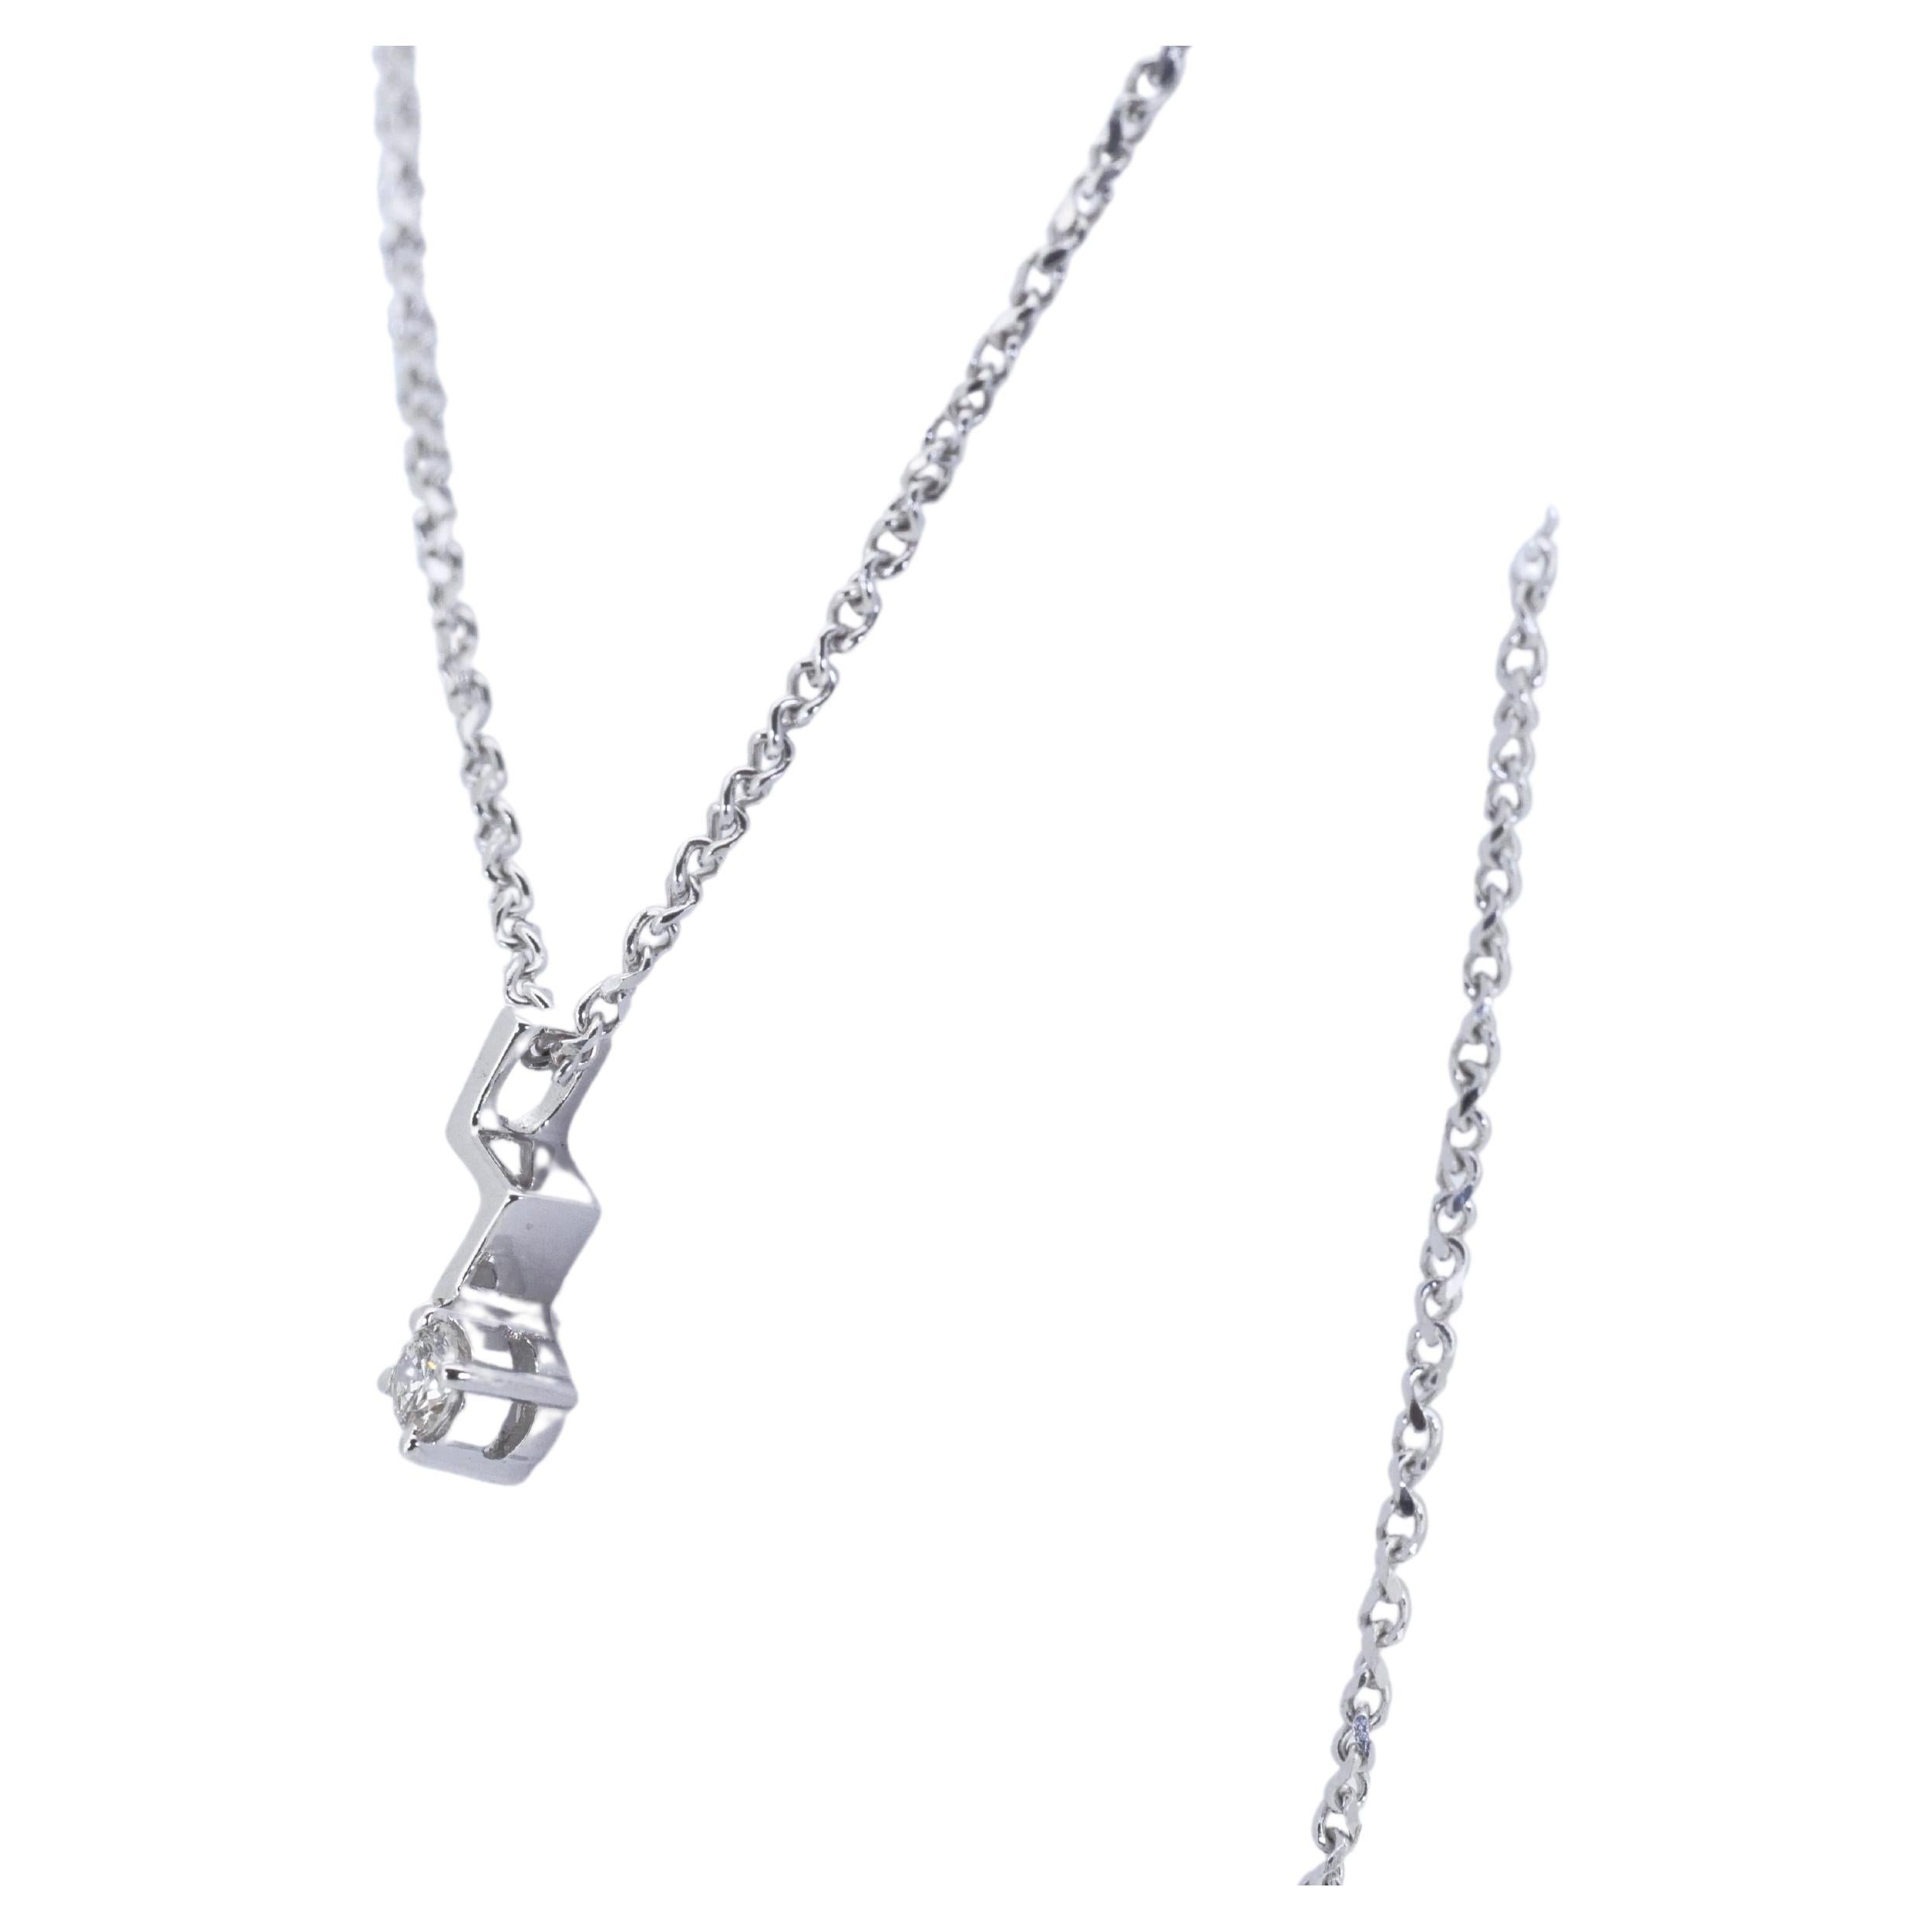 Women's Luxurious 18k White Gold Solitaire Necklace w/ 0.10 Carat Natural Diamonds For Sale